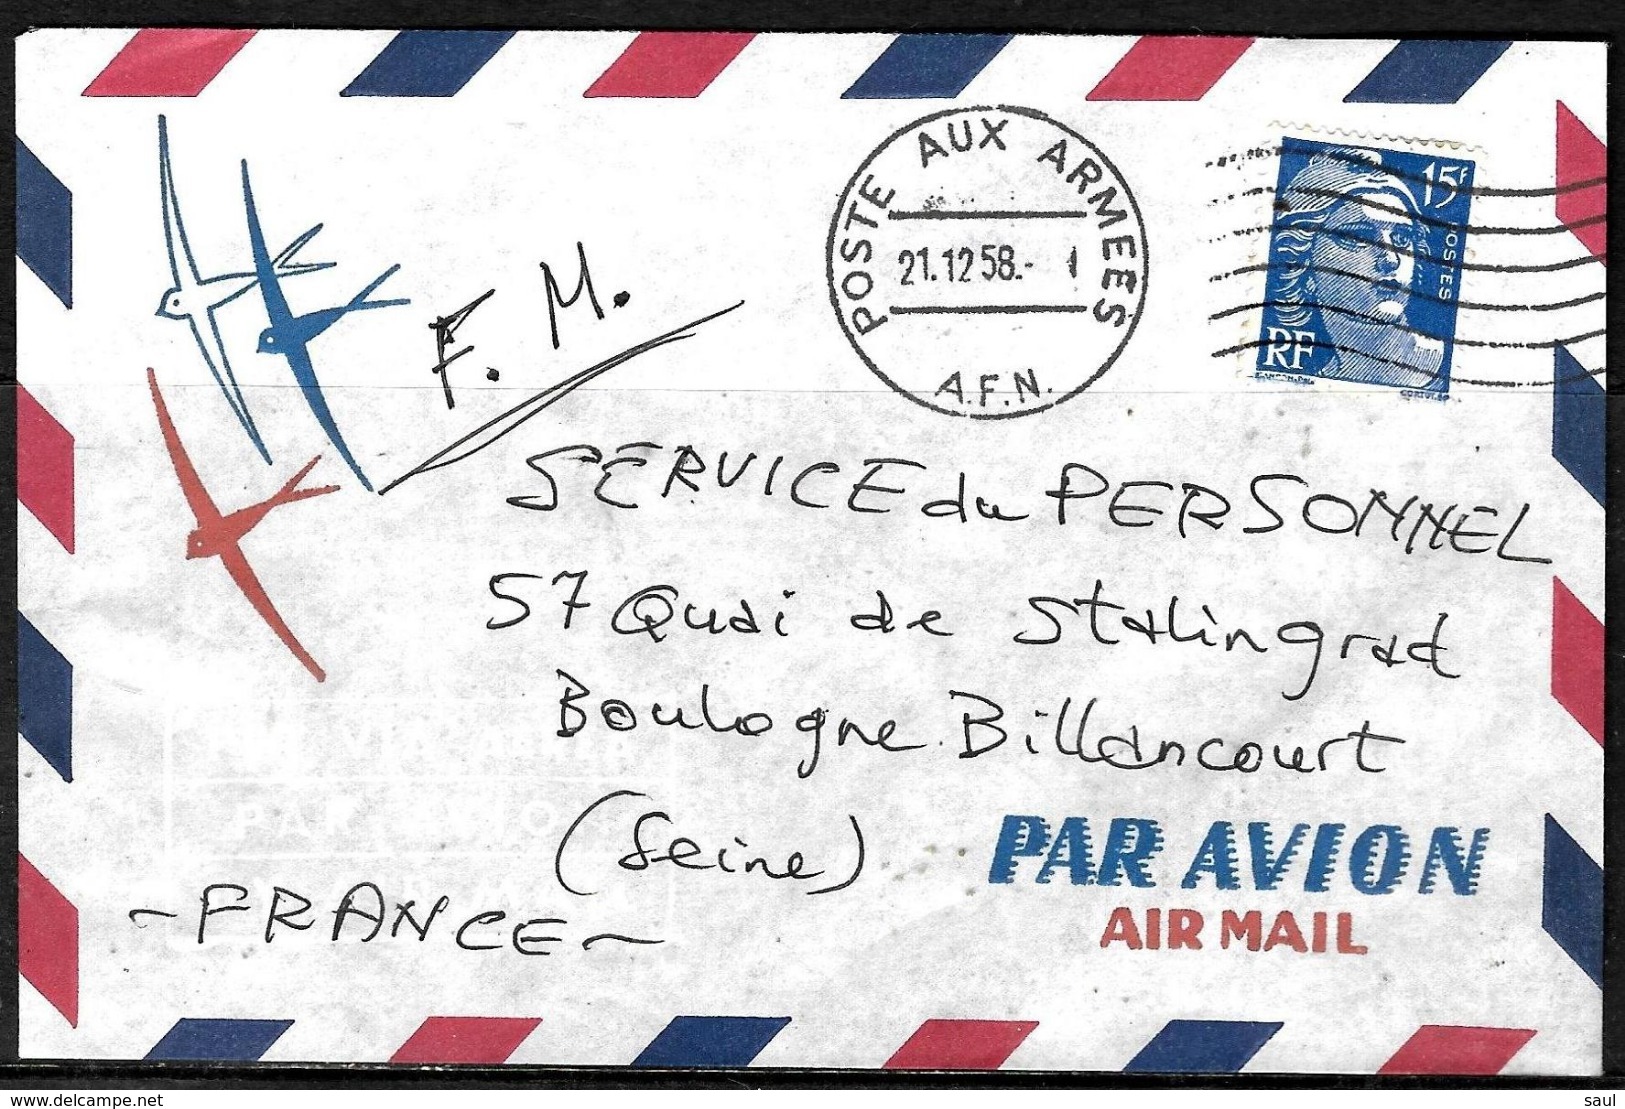 479 - FRANCE - A.F.N. - 1958 - MILITARY COVER - TO CHECK - Unclassified